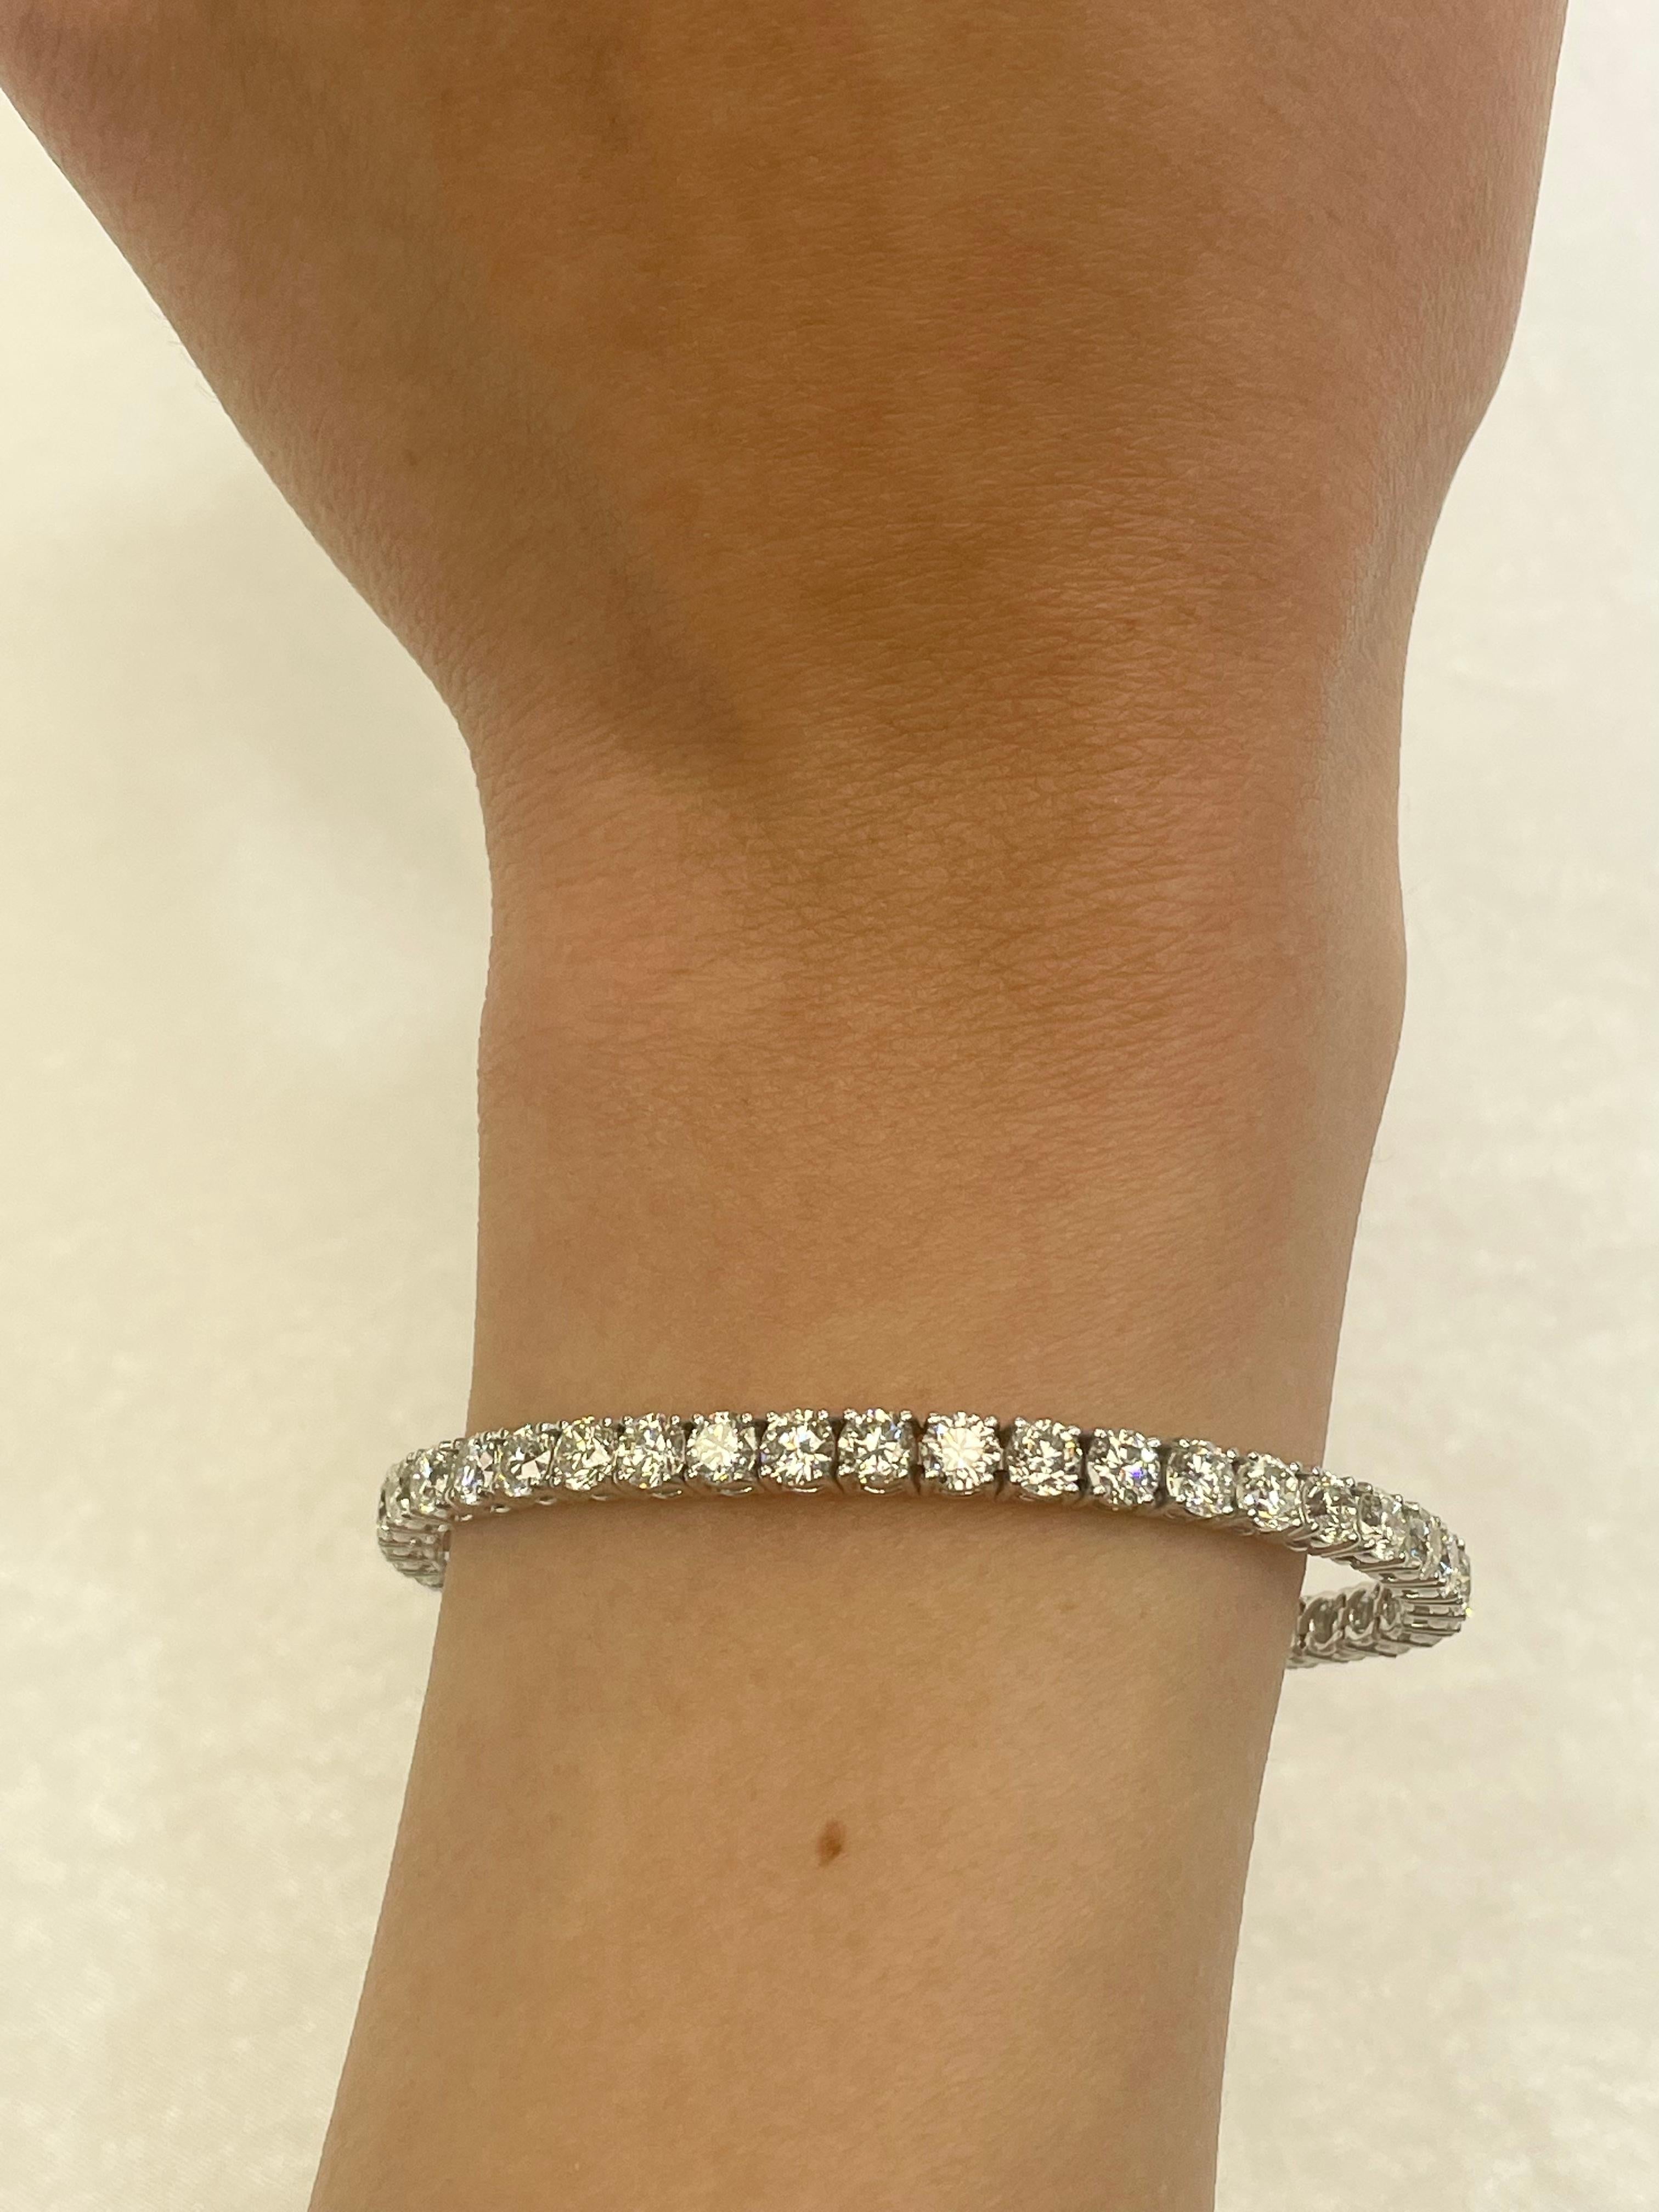 Exquisite and timeless diamonds tennis bracelet, by Alexander Beverly Hills.
42 round brilliant diamonds, 10.70 carats total. Approximately H/I color and VS clarity. Four prong set in 18k white gold, 16.08 grams, 7 inches. 
Accommodated with an up